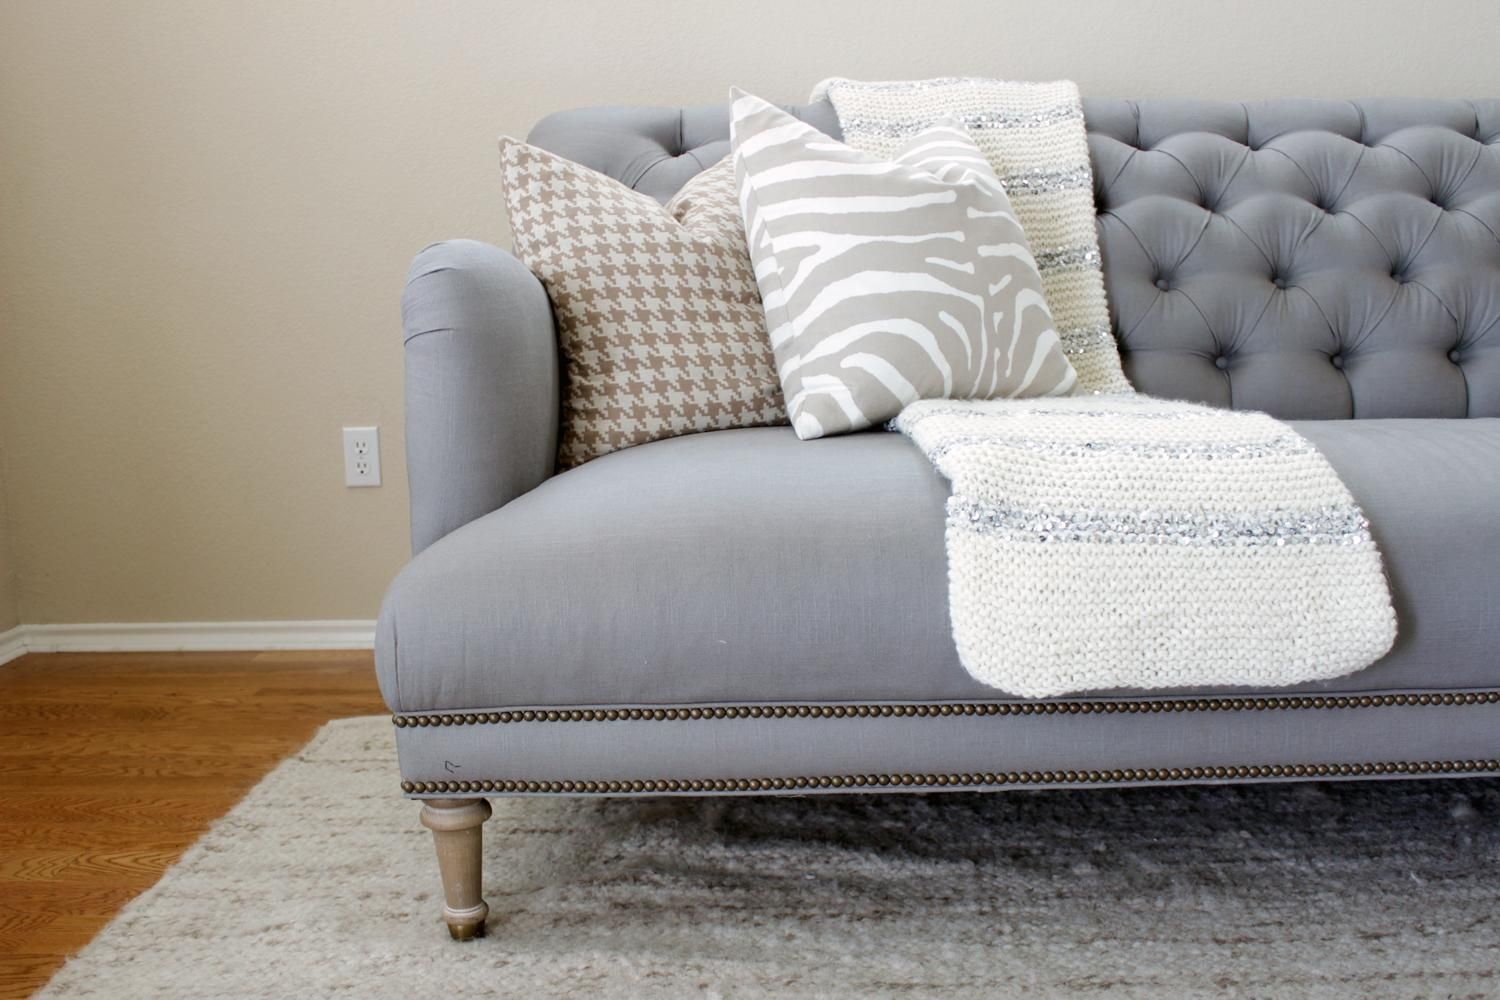 Tufted Linen Couches | Tehranmix Decoration Throughout Tufted Linen Sofas (View 6 of 20)